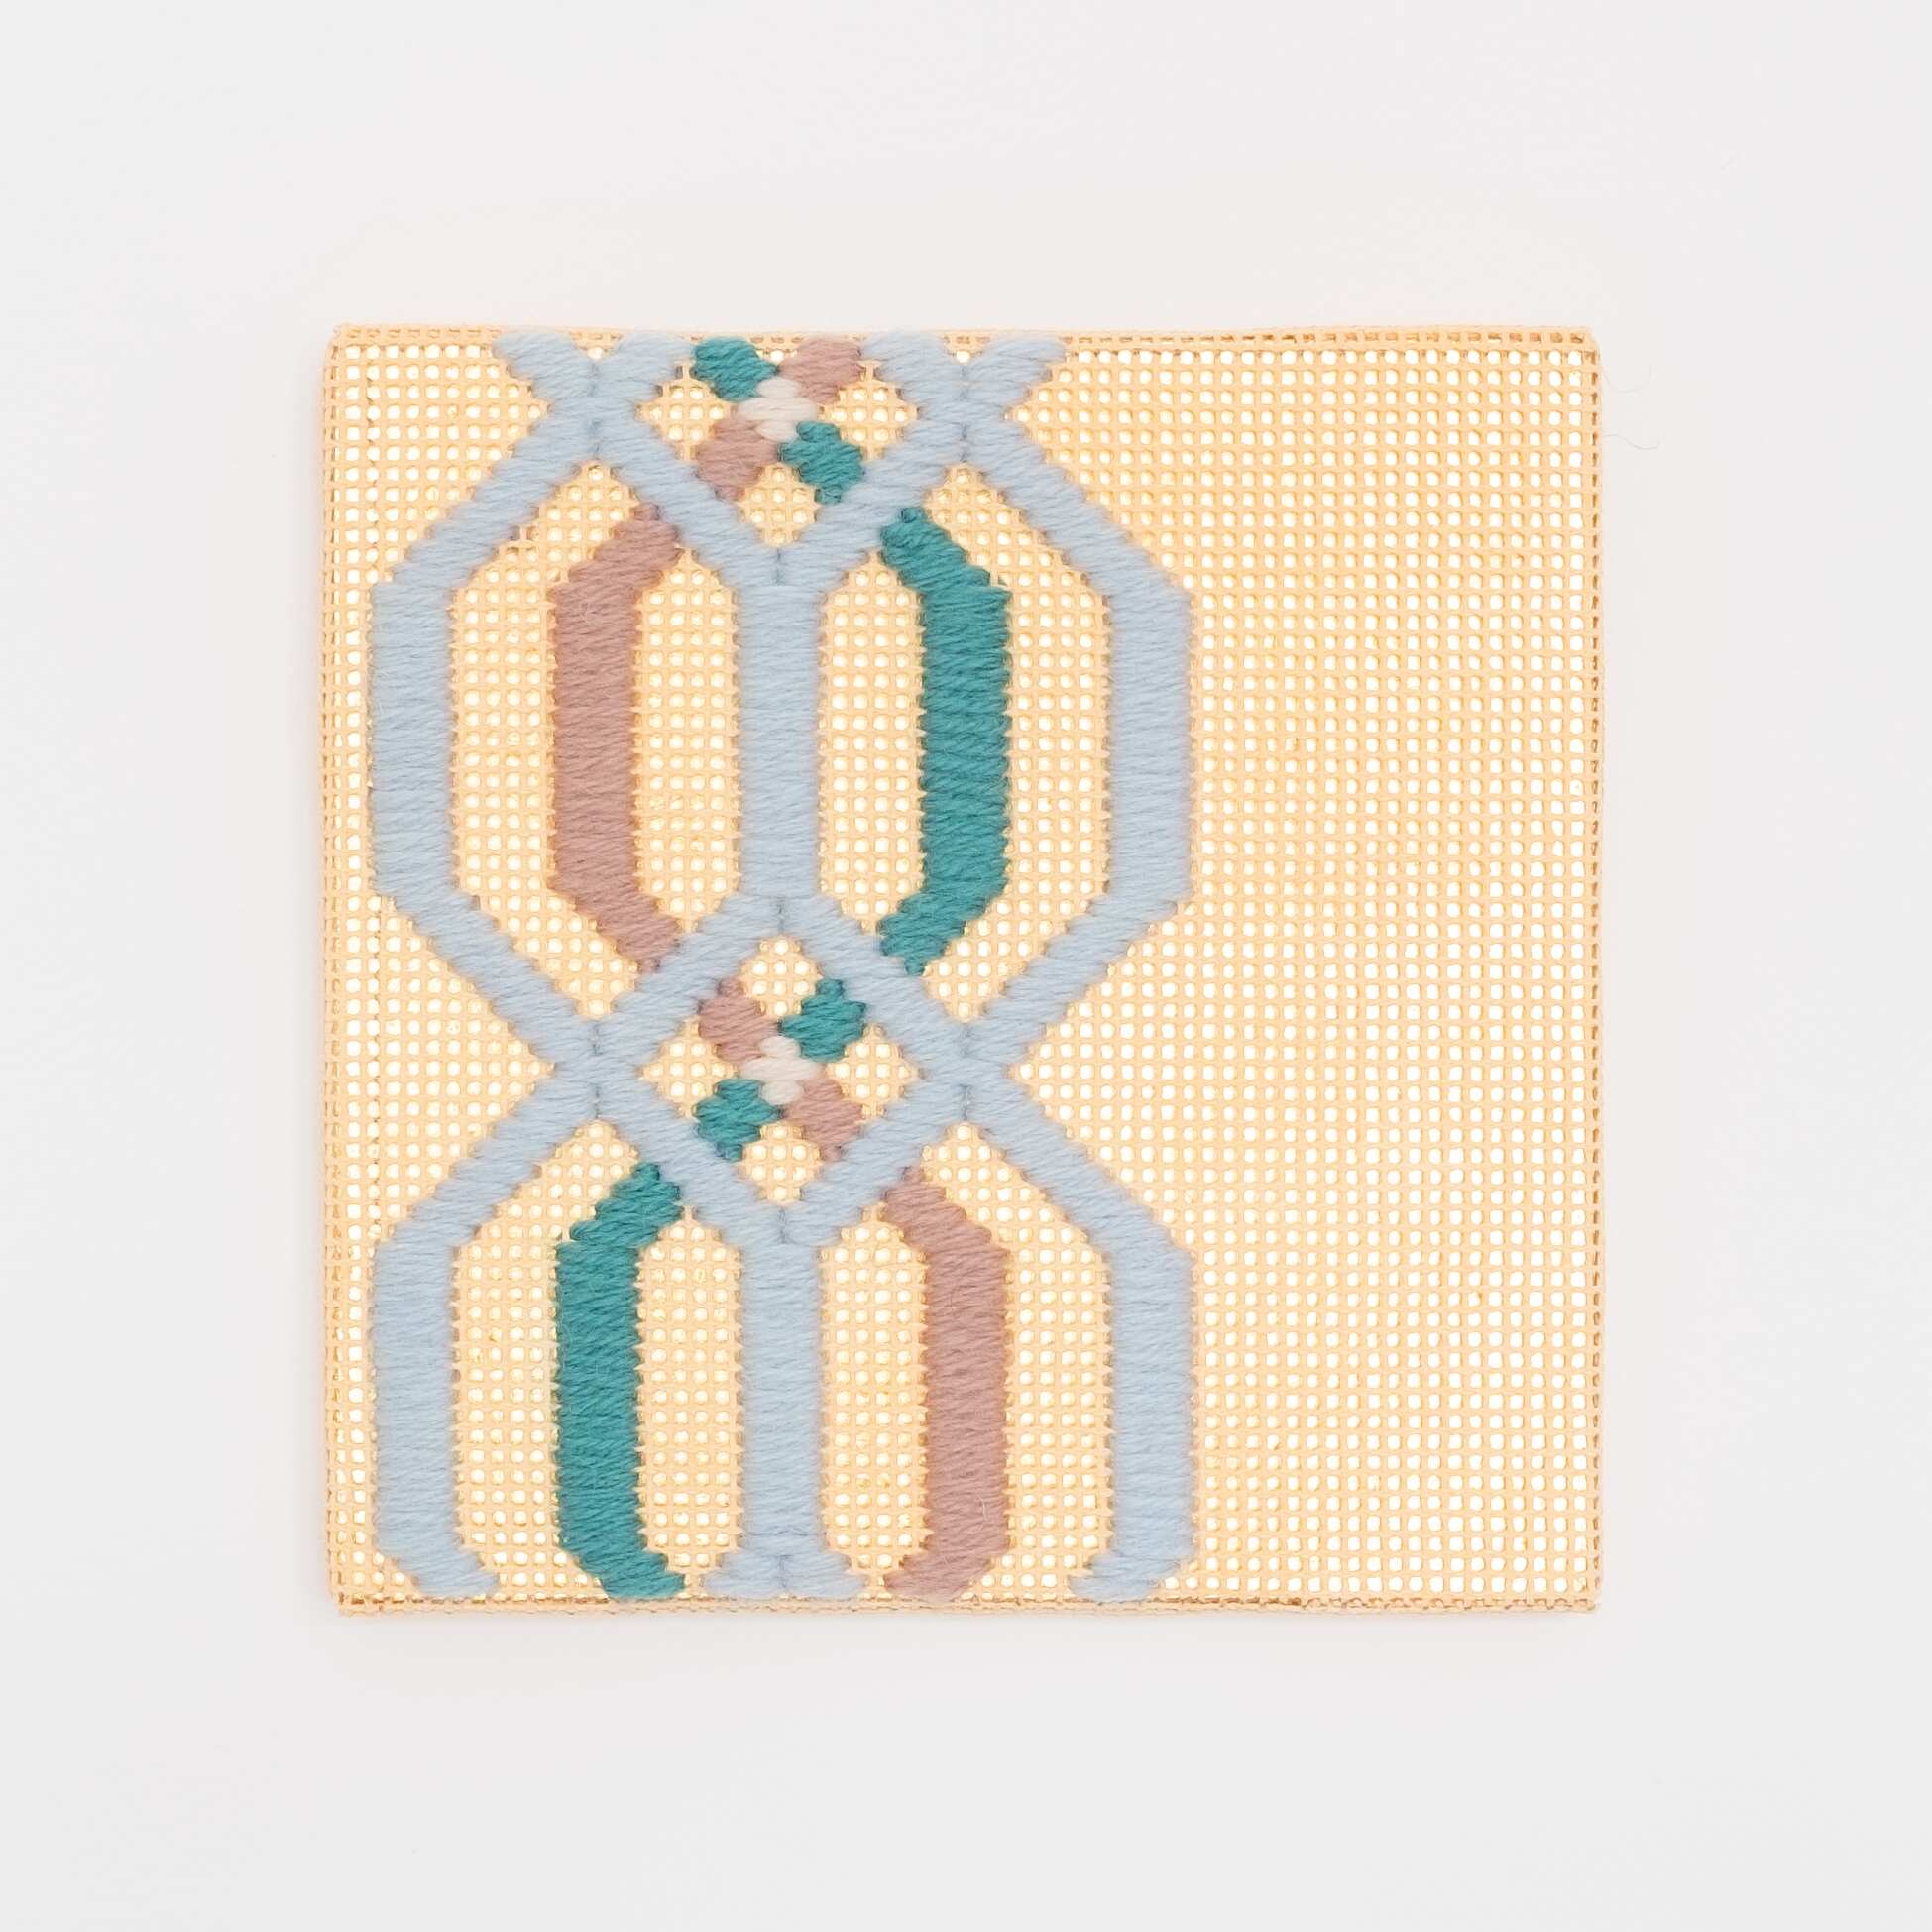 Border fragment [blue-teal-brown on peach], Hand-embroidered wool thread and acrylic paint on canvas over gilded panel, 2021